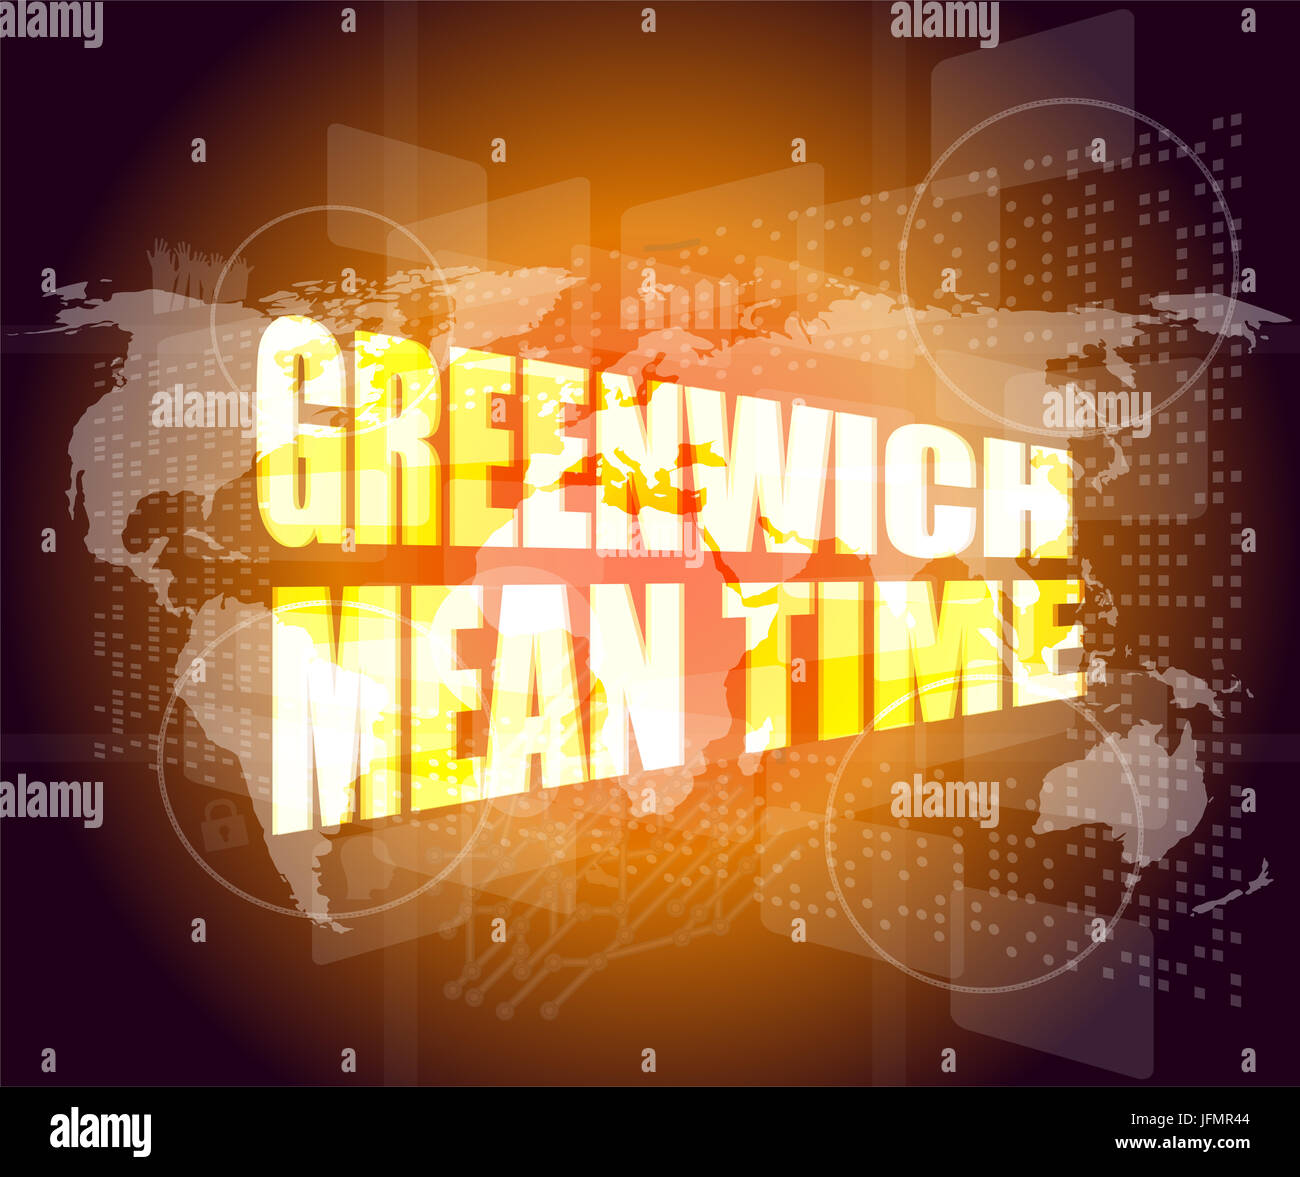 greenwich mean time word on digital touch screen Stock Photo